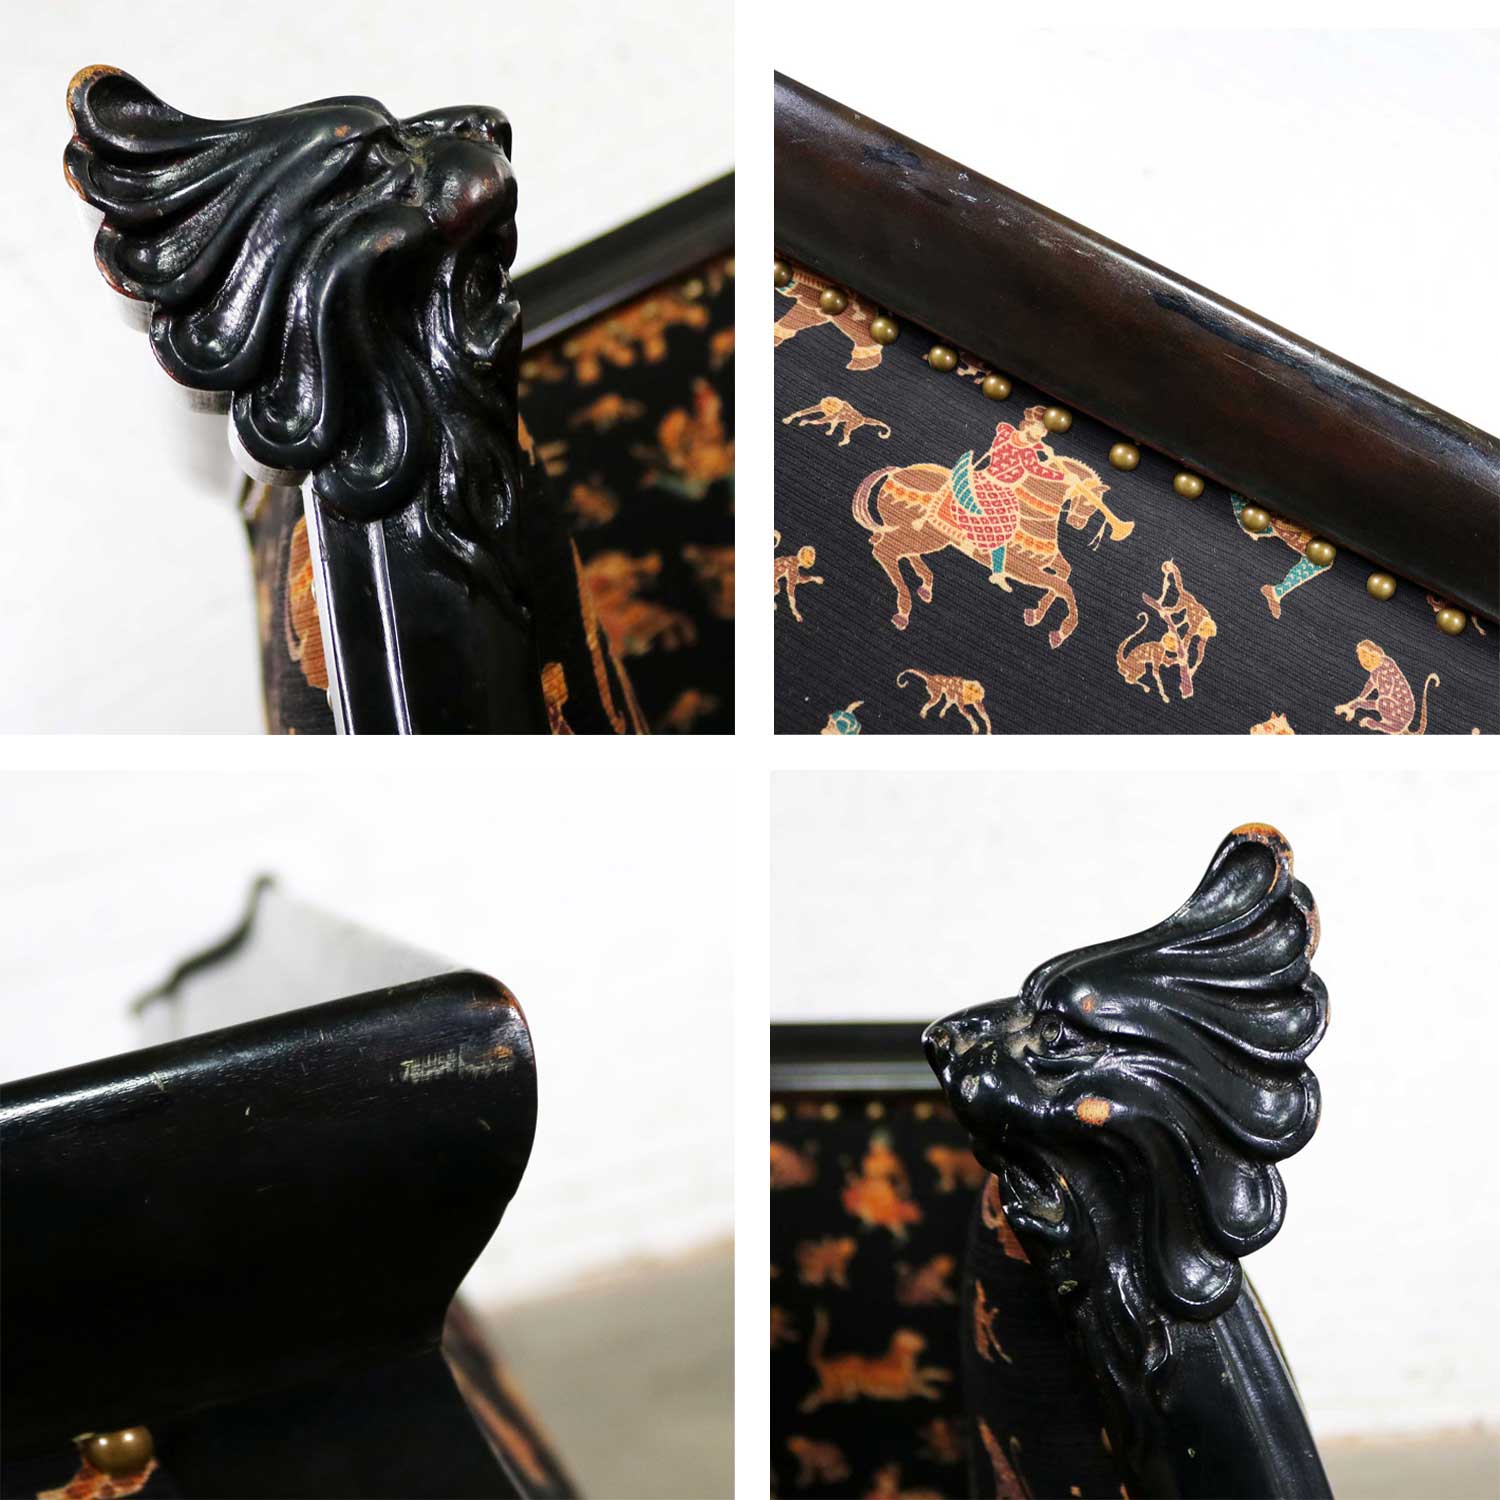 Antique Victorian Wishbone Barrel Chair Carved Lion’s Heads and Claw Feet Ebonized